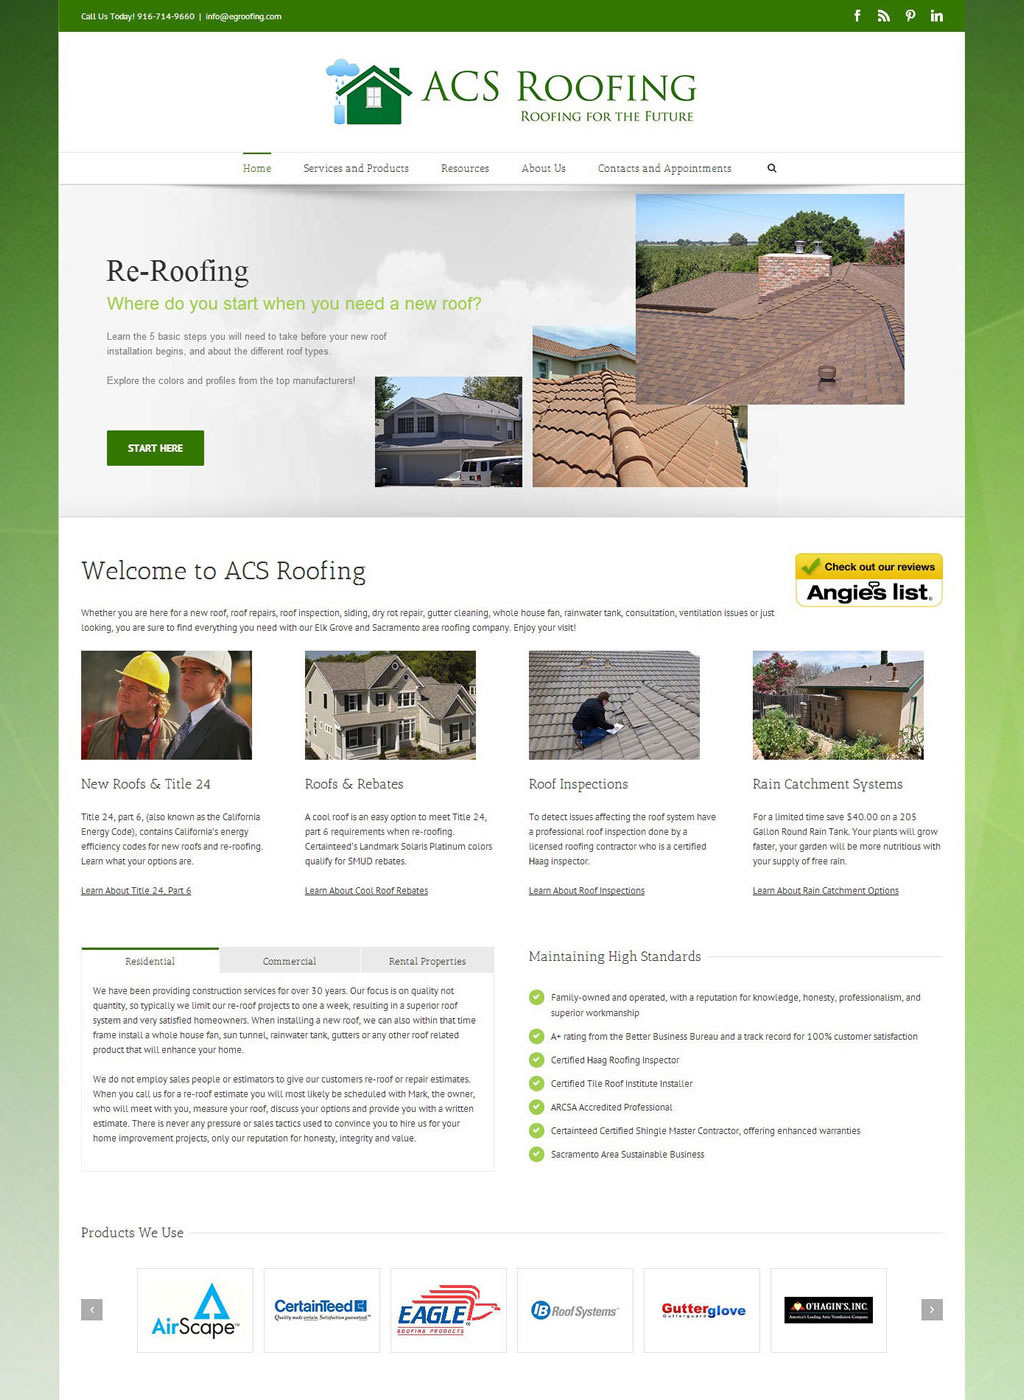 Home page of ACS Roofing